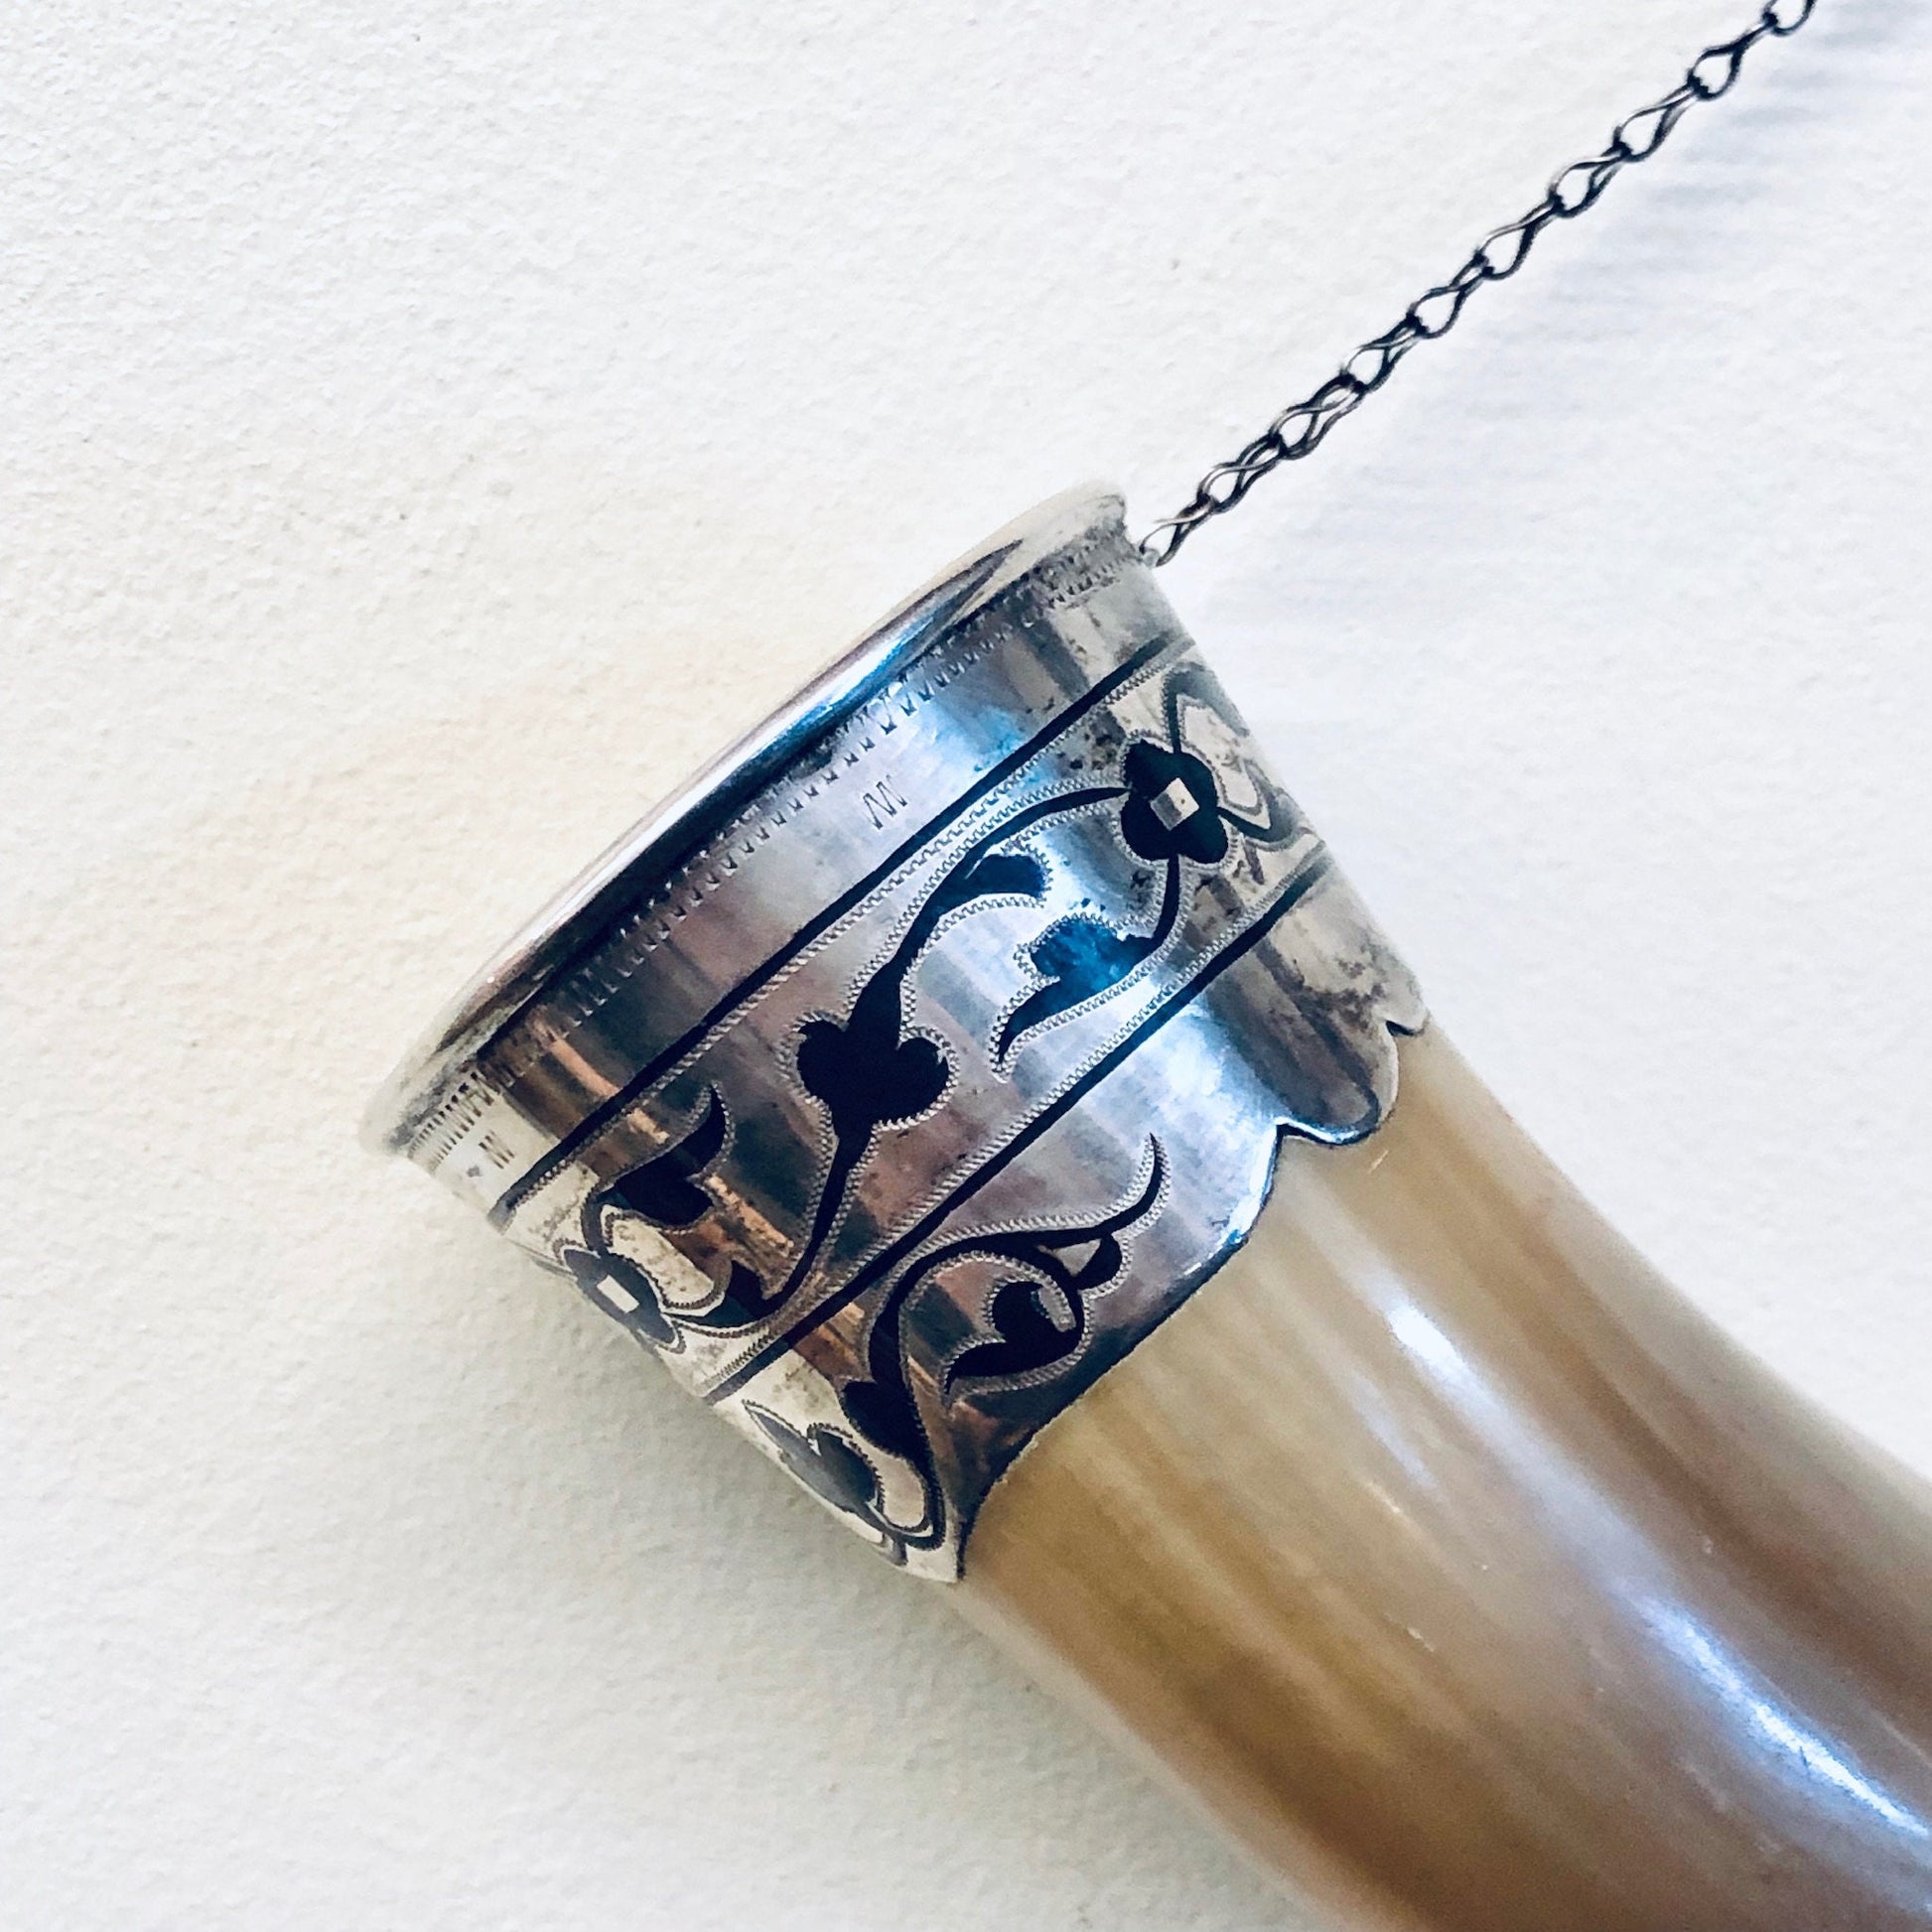 Vintage decorative horn cup with silver accents hanging from chain, unique wall decor piece